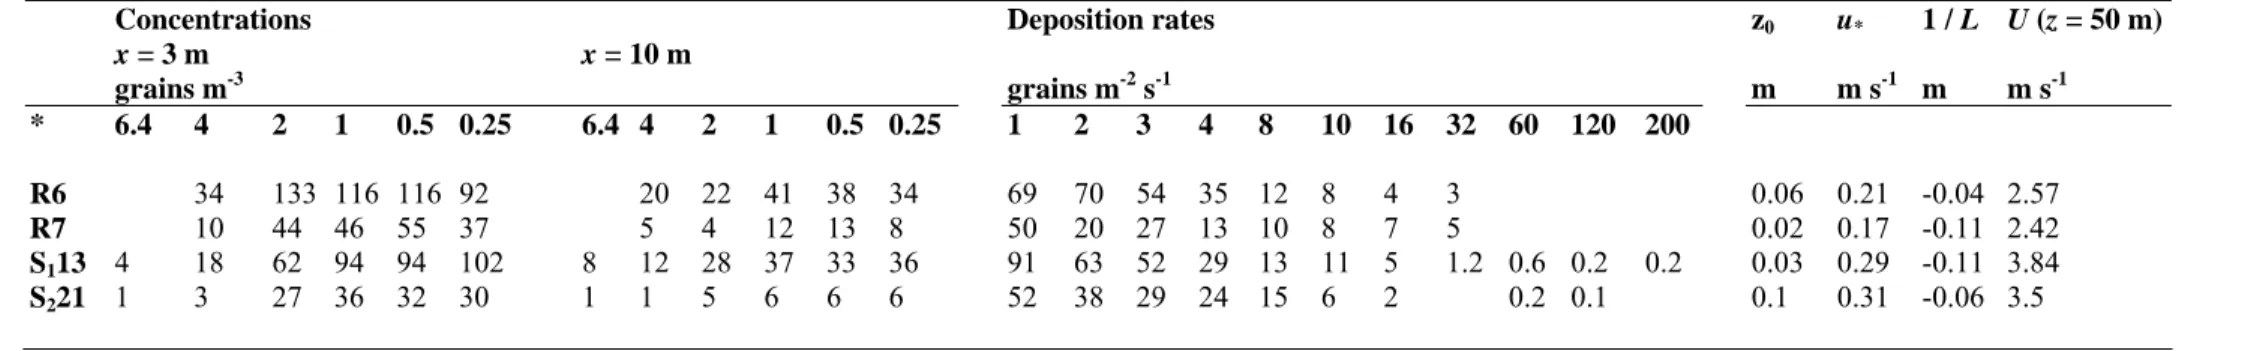 Table 2. Measured concentrations and deposition rates as well as parameters used in the model for each simulation of Figure 3